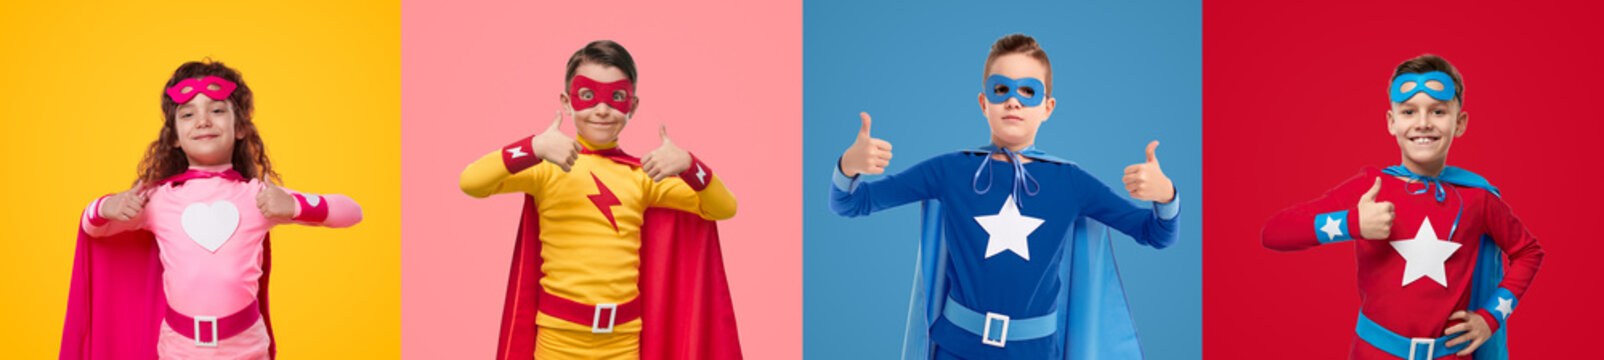 Cheerful kids in superhero costumes showing thumbs up